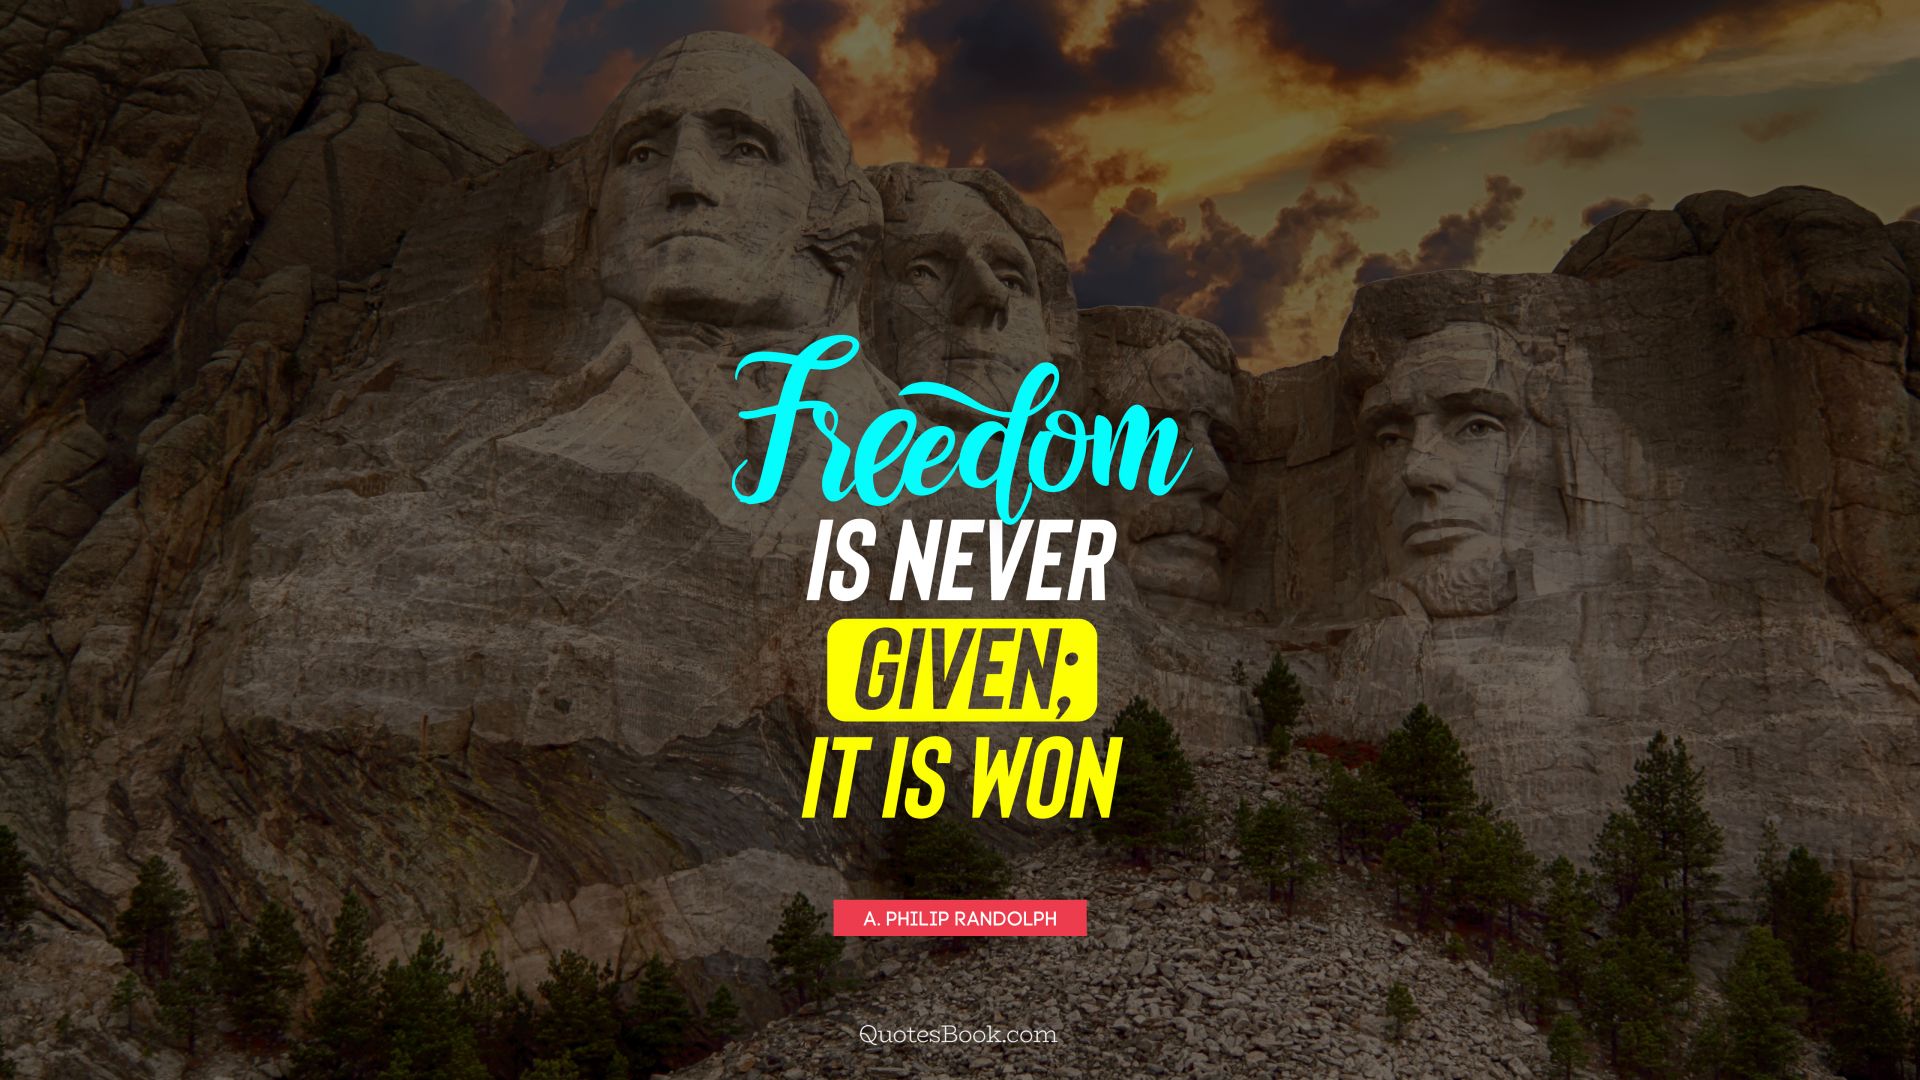 Freedom is never given; it is won. - Quote by A. Philip Randolph